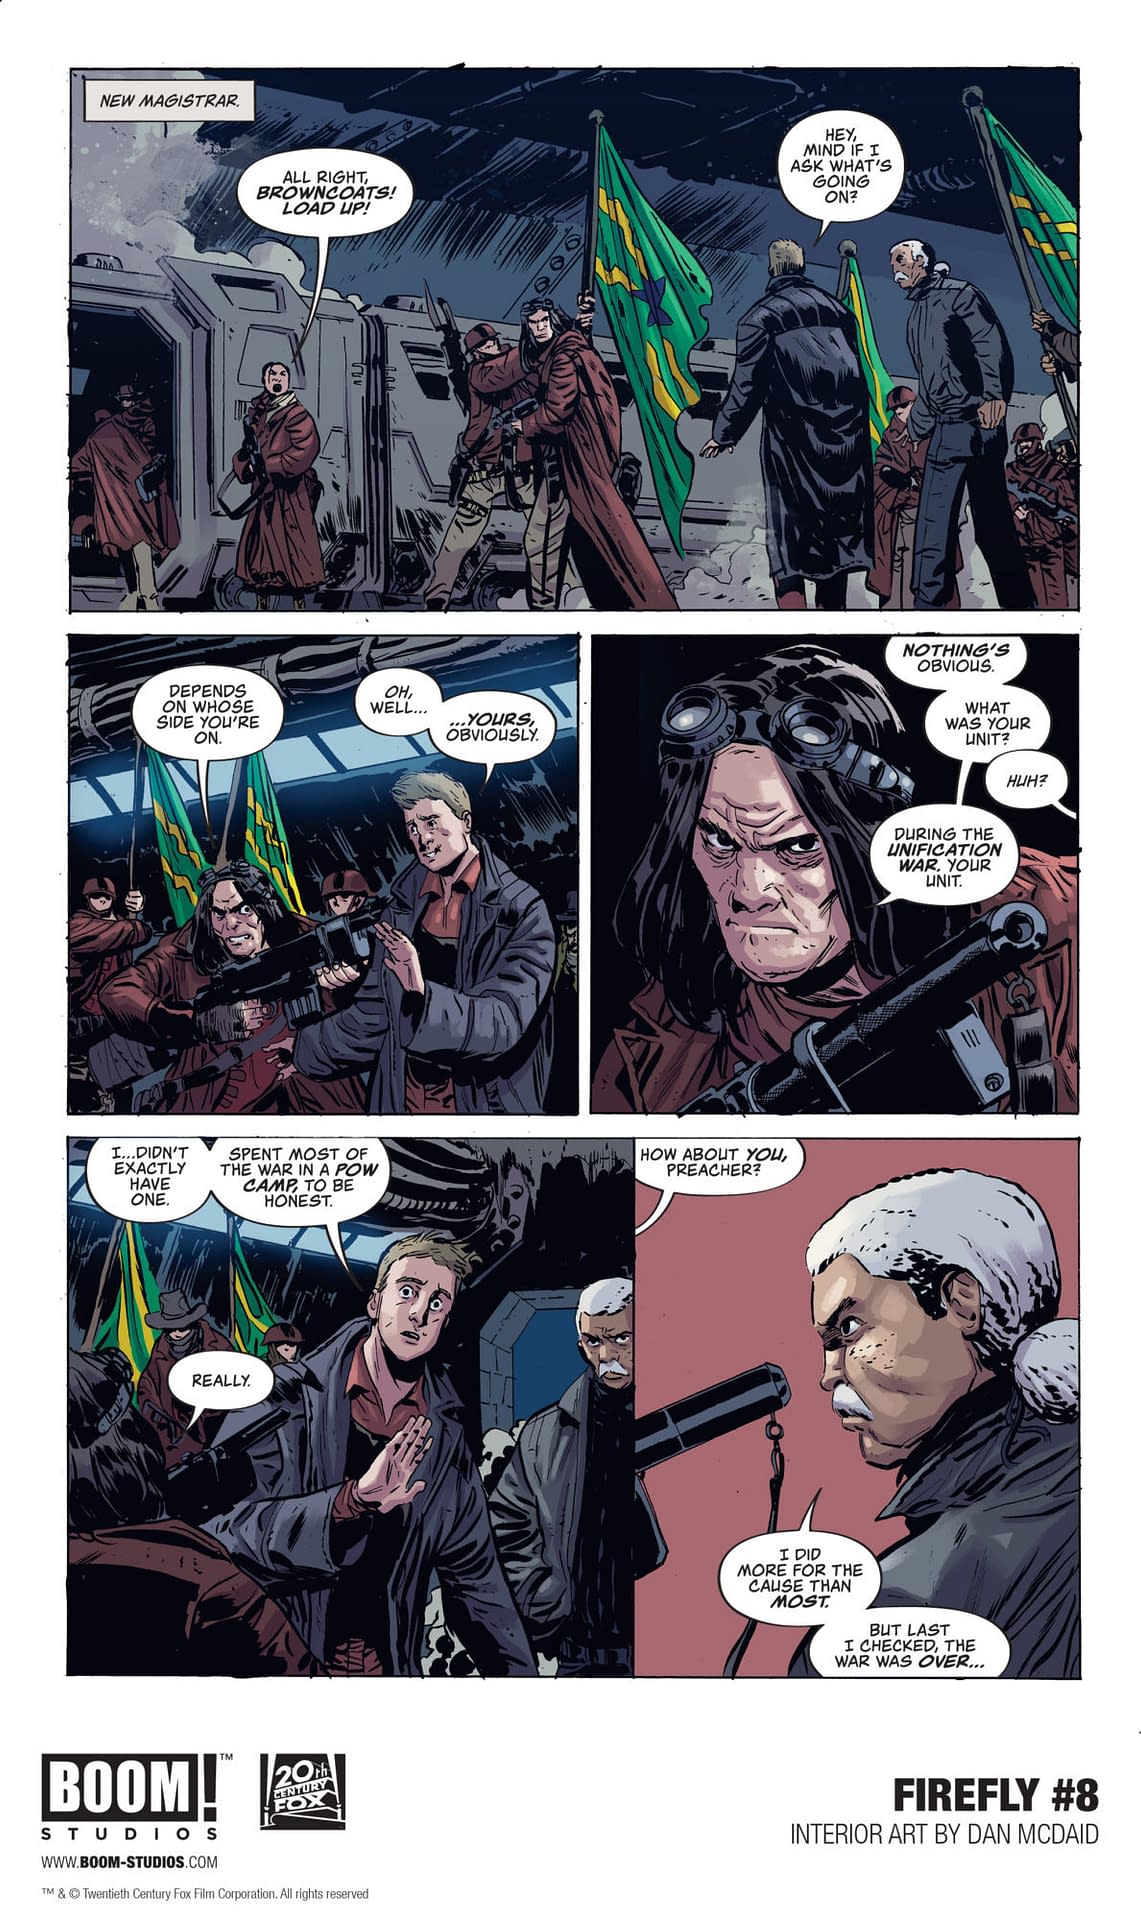 Forget About Fireworks, Firebronies, Here's a First Look at Firefly #8 for July Fourth